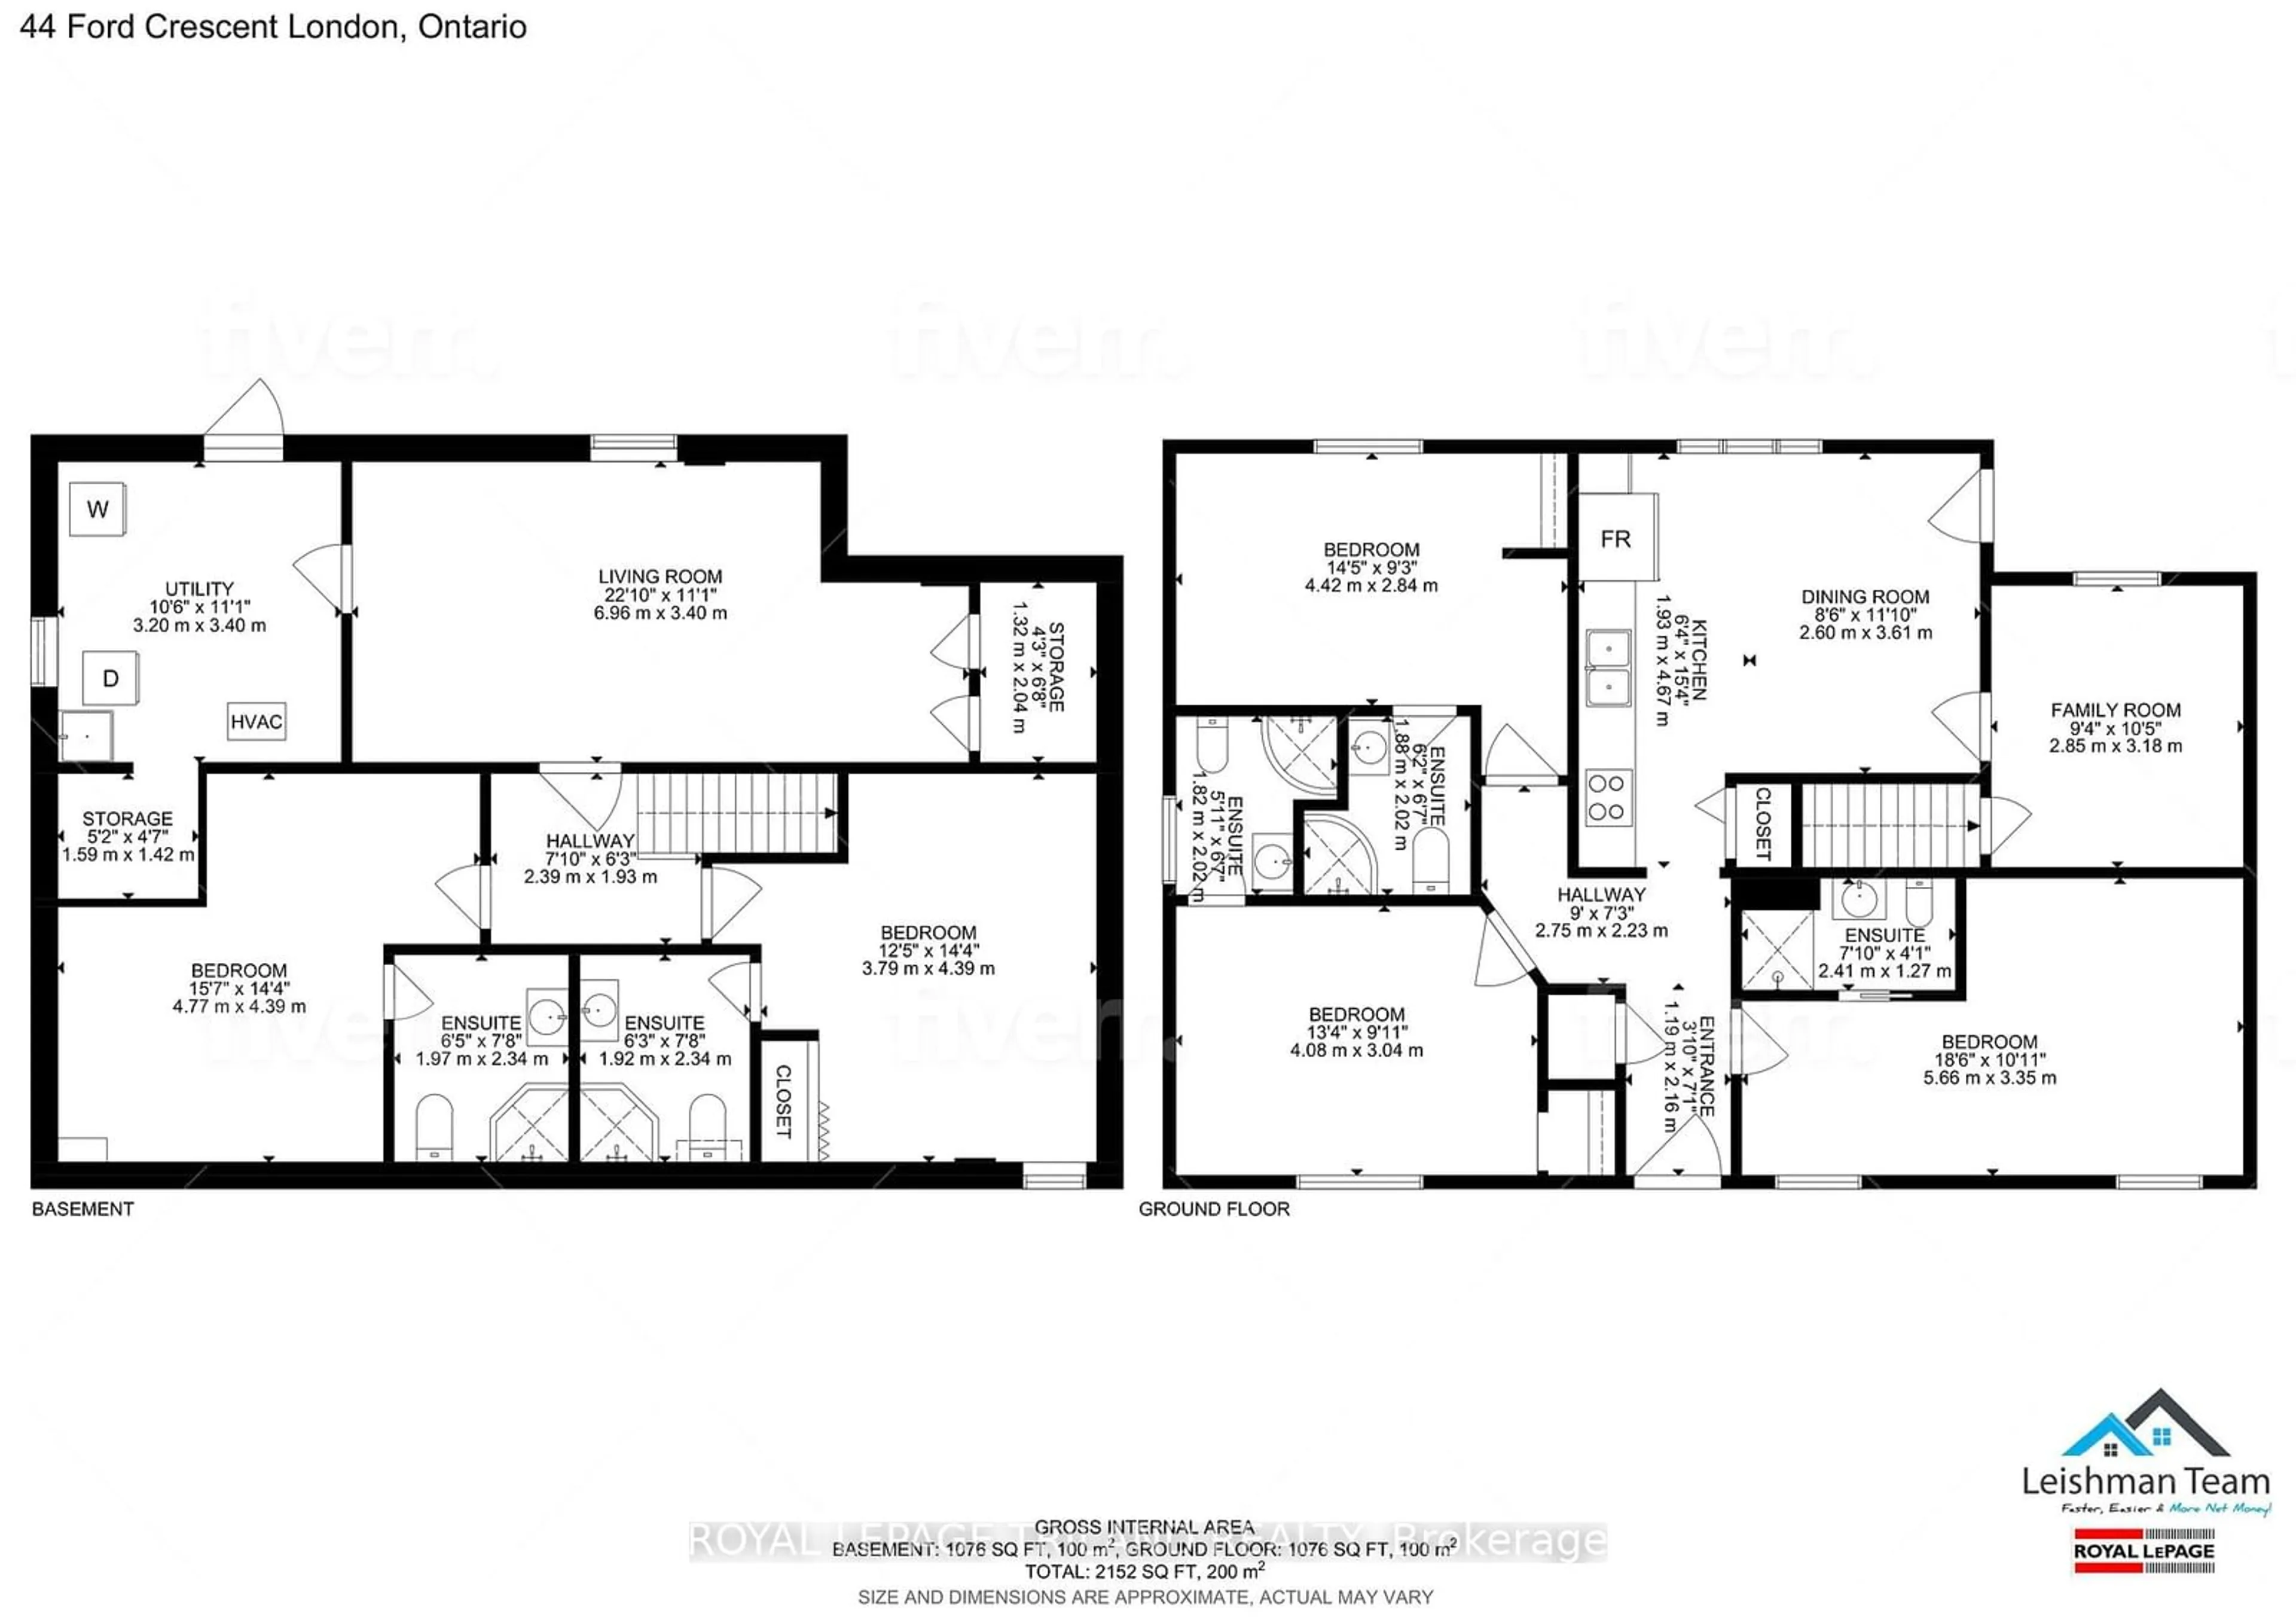 Floor plan for 44 Ford Cres, London Ontario N6G 1H9